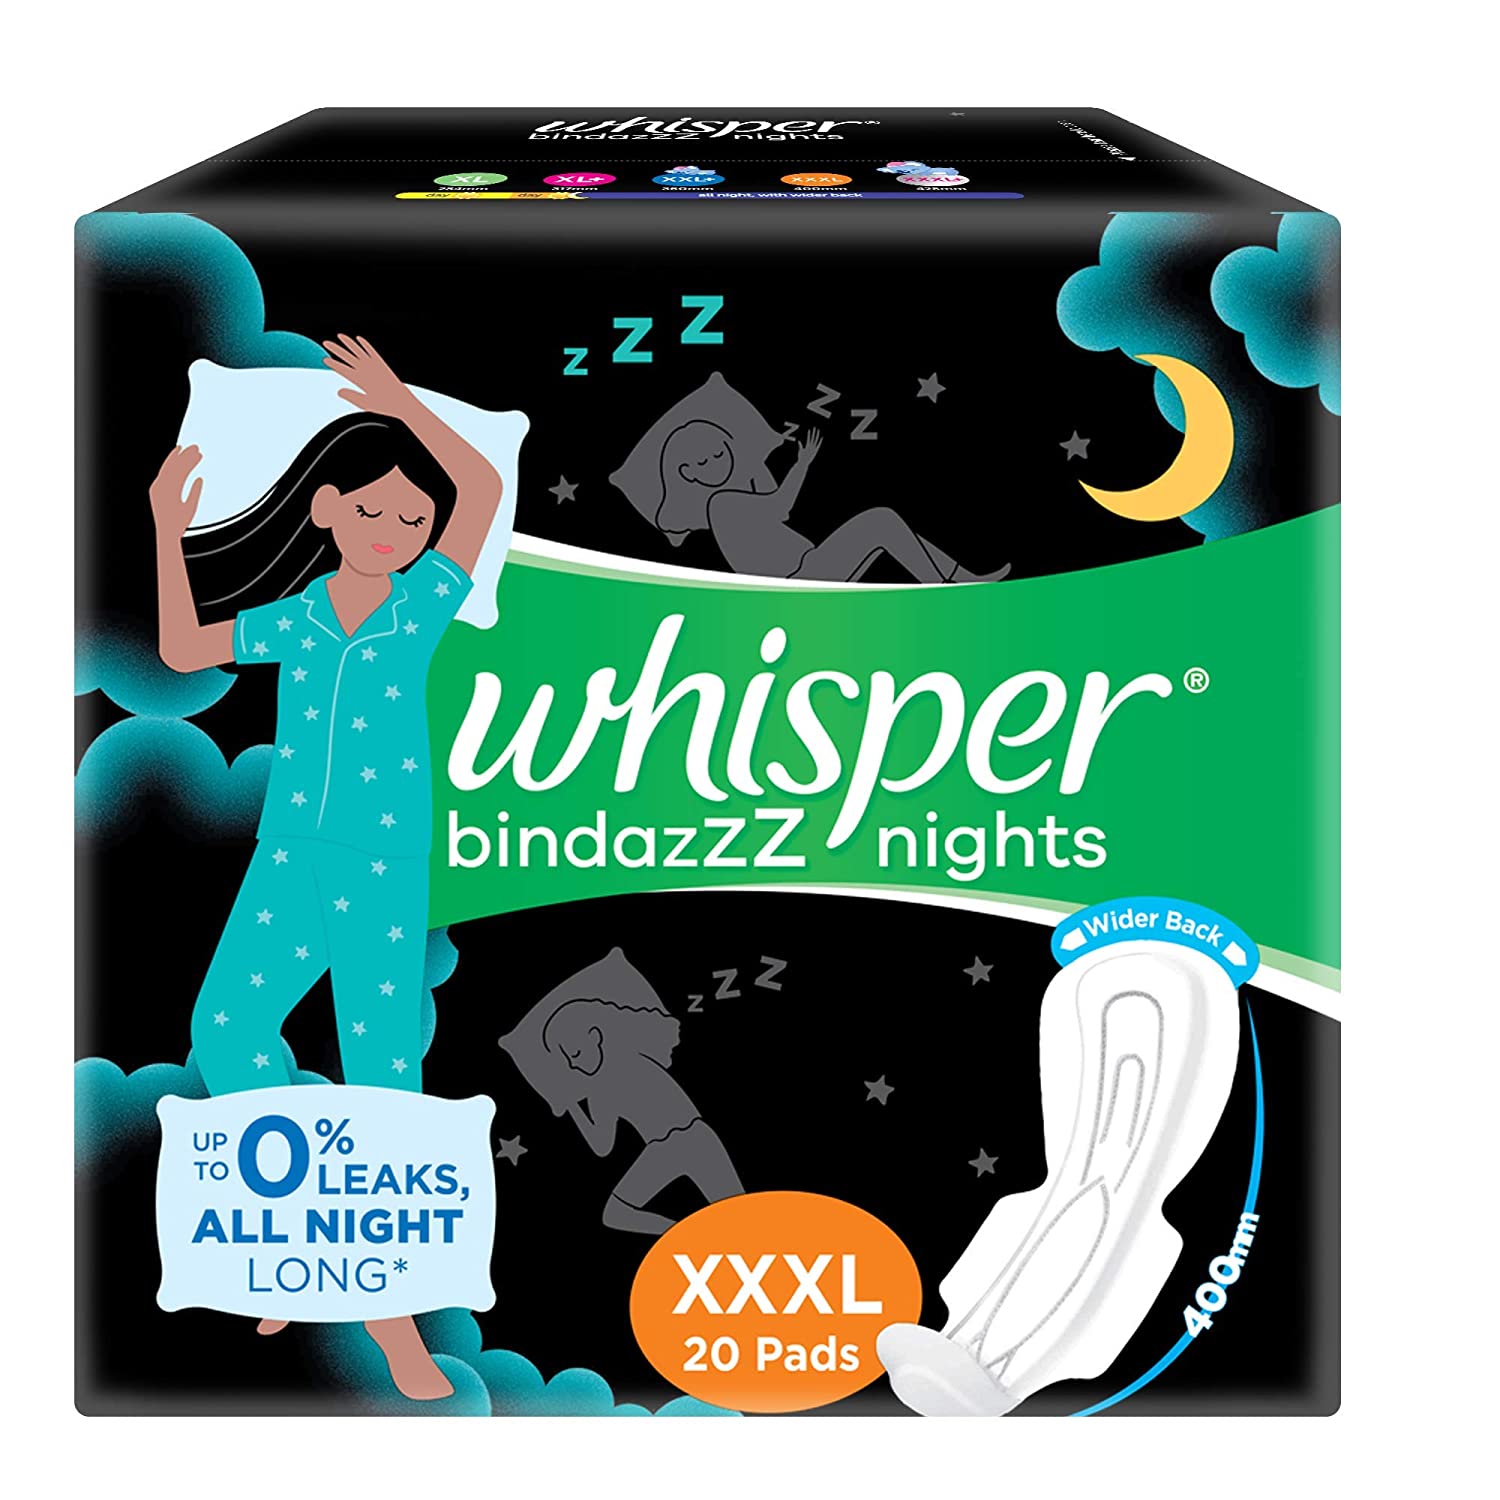 Whisper bindazzz Nights Pads For Women, XXX-Large Pack of 20 pads - DABRA  Store